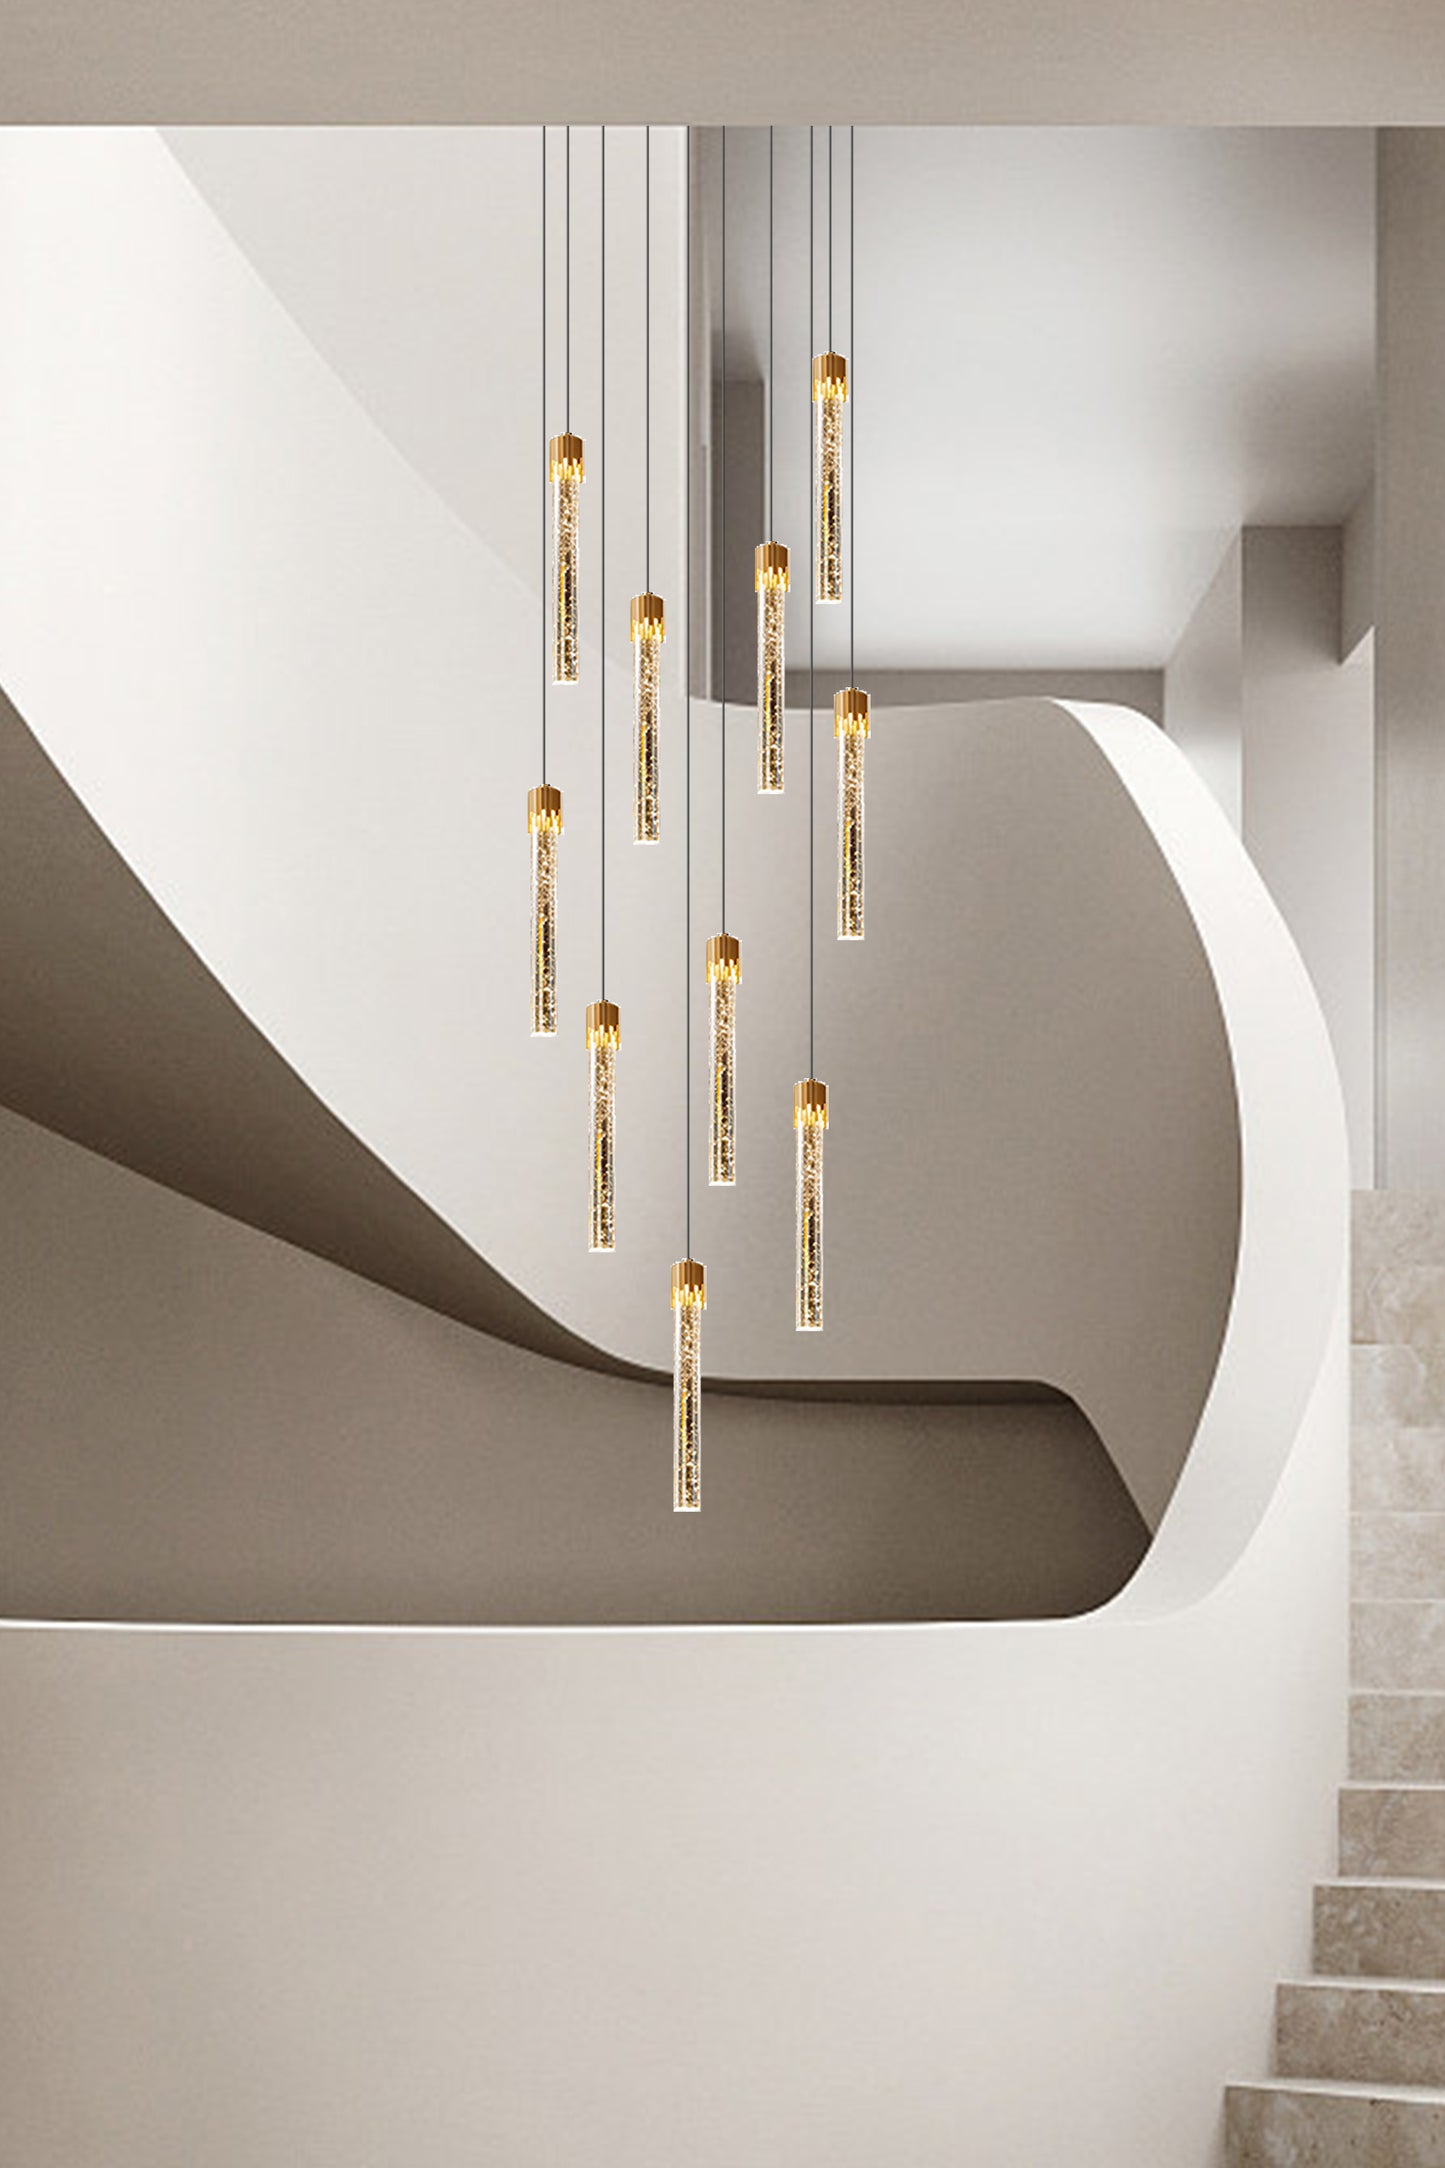 Grand staircase with a dazzling gold bubble crystal pendant light, lighting up the space beautifully.